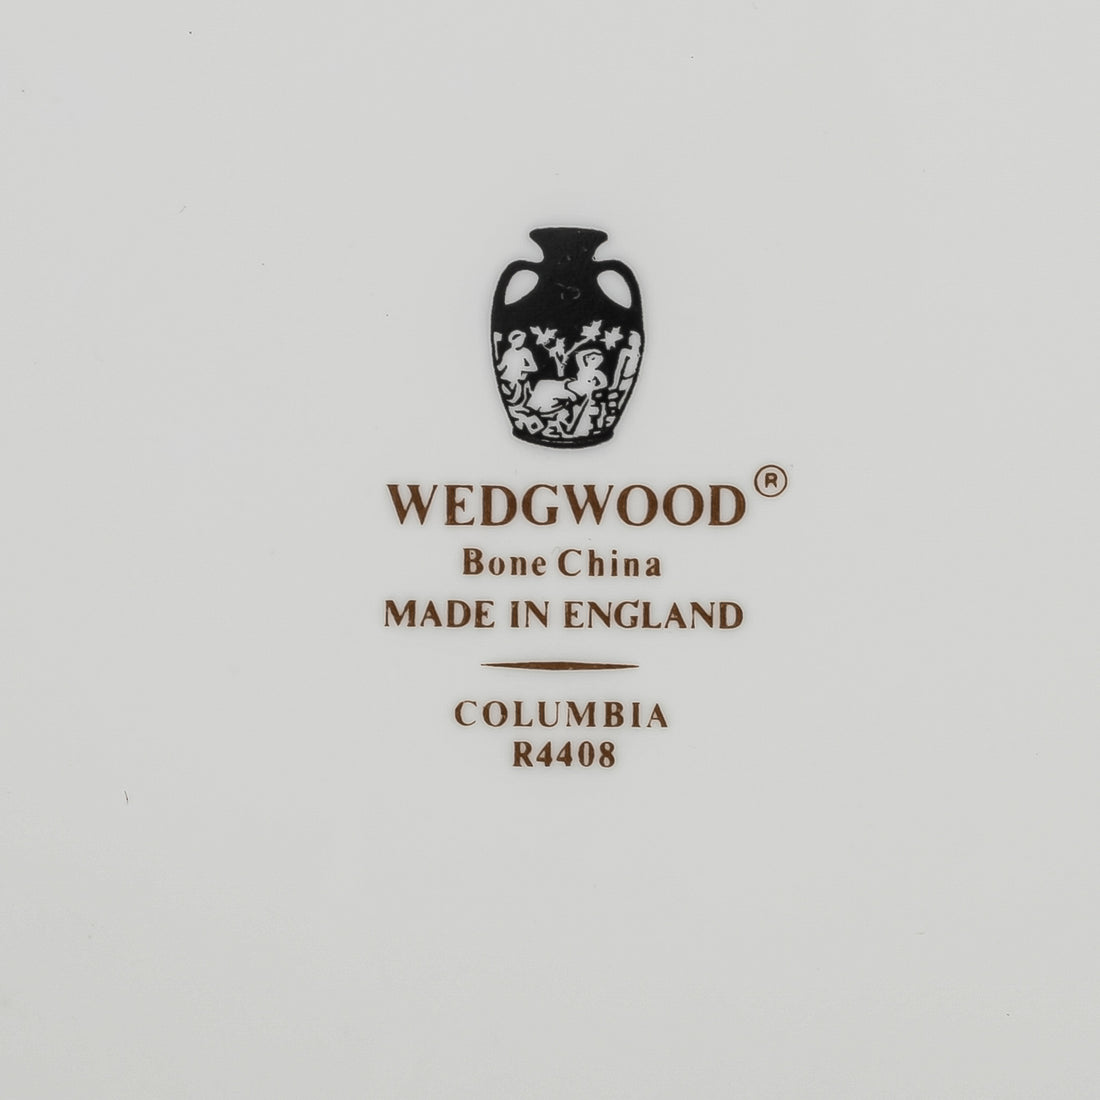 WEDGWOOD Gold Columbia 10 Place Settings w/Extras